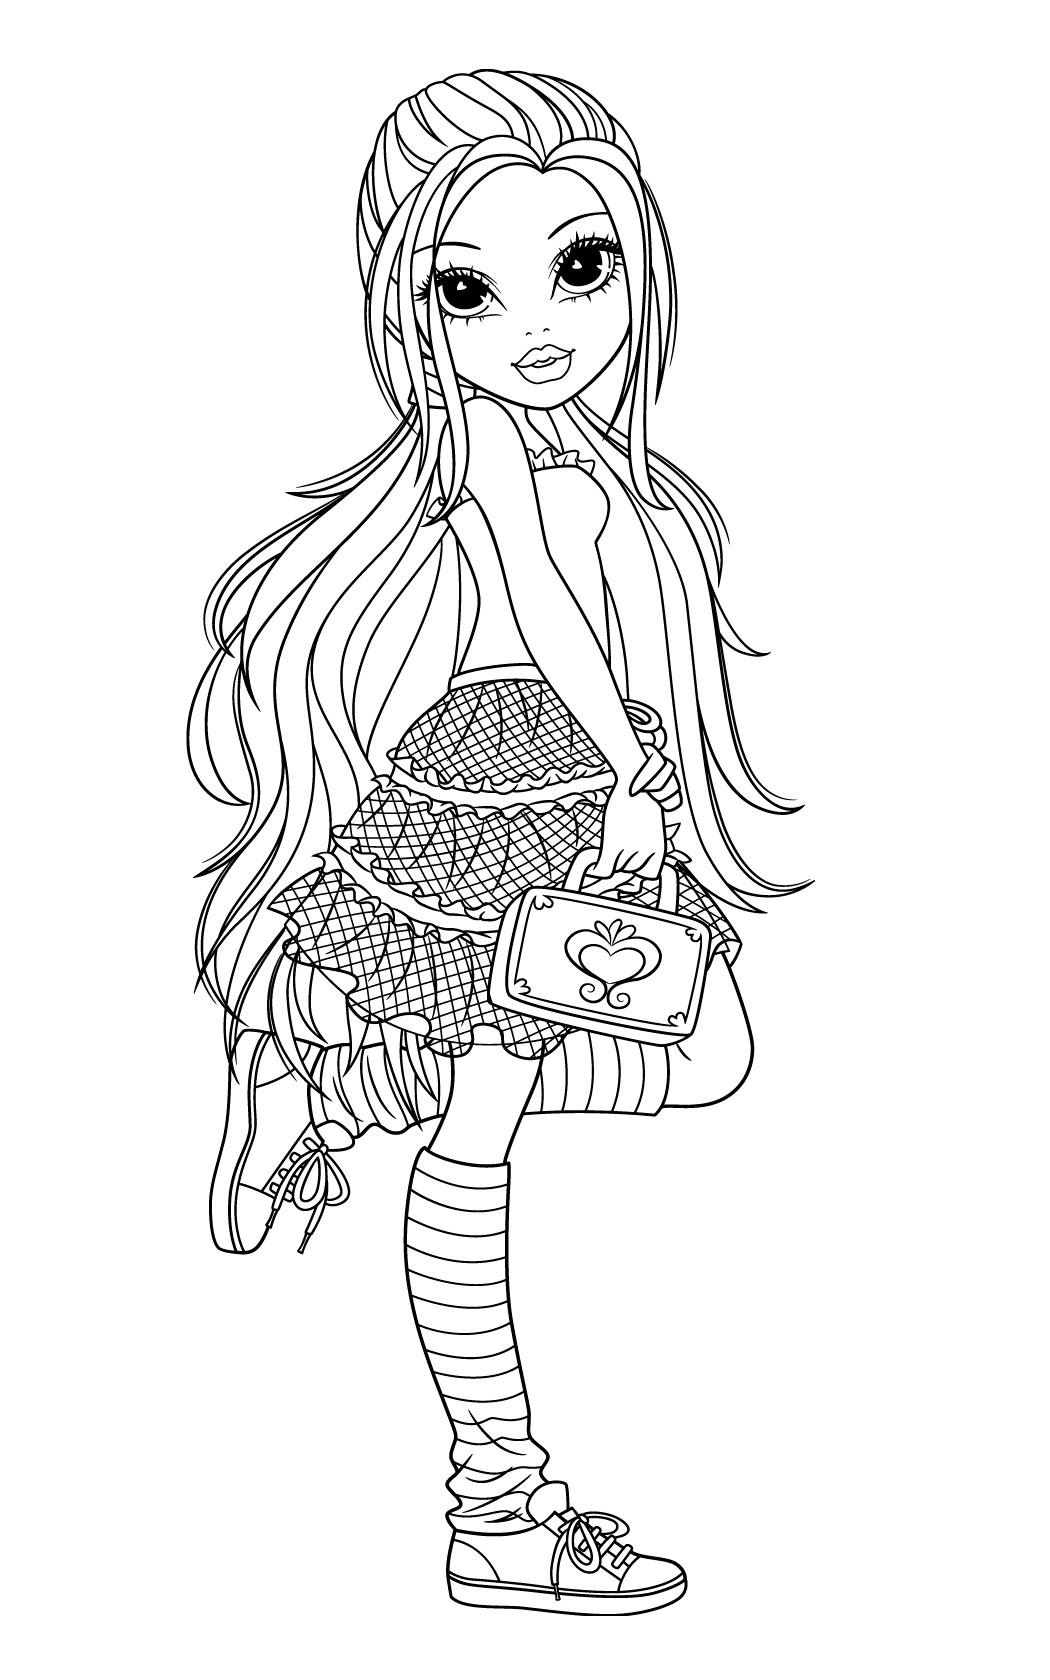 Free Coloring Sheets For Girls
 New Moxie Girlz Coloring Pages will be added frequently so